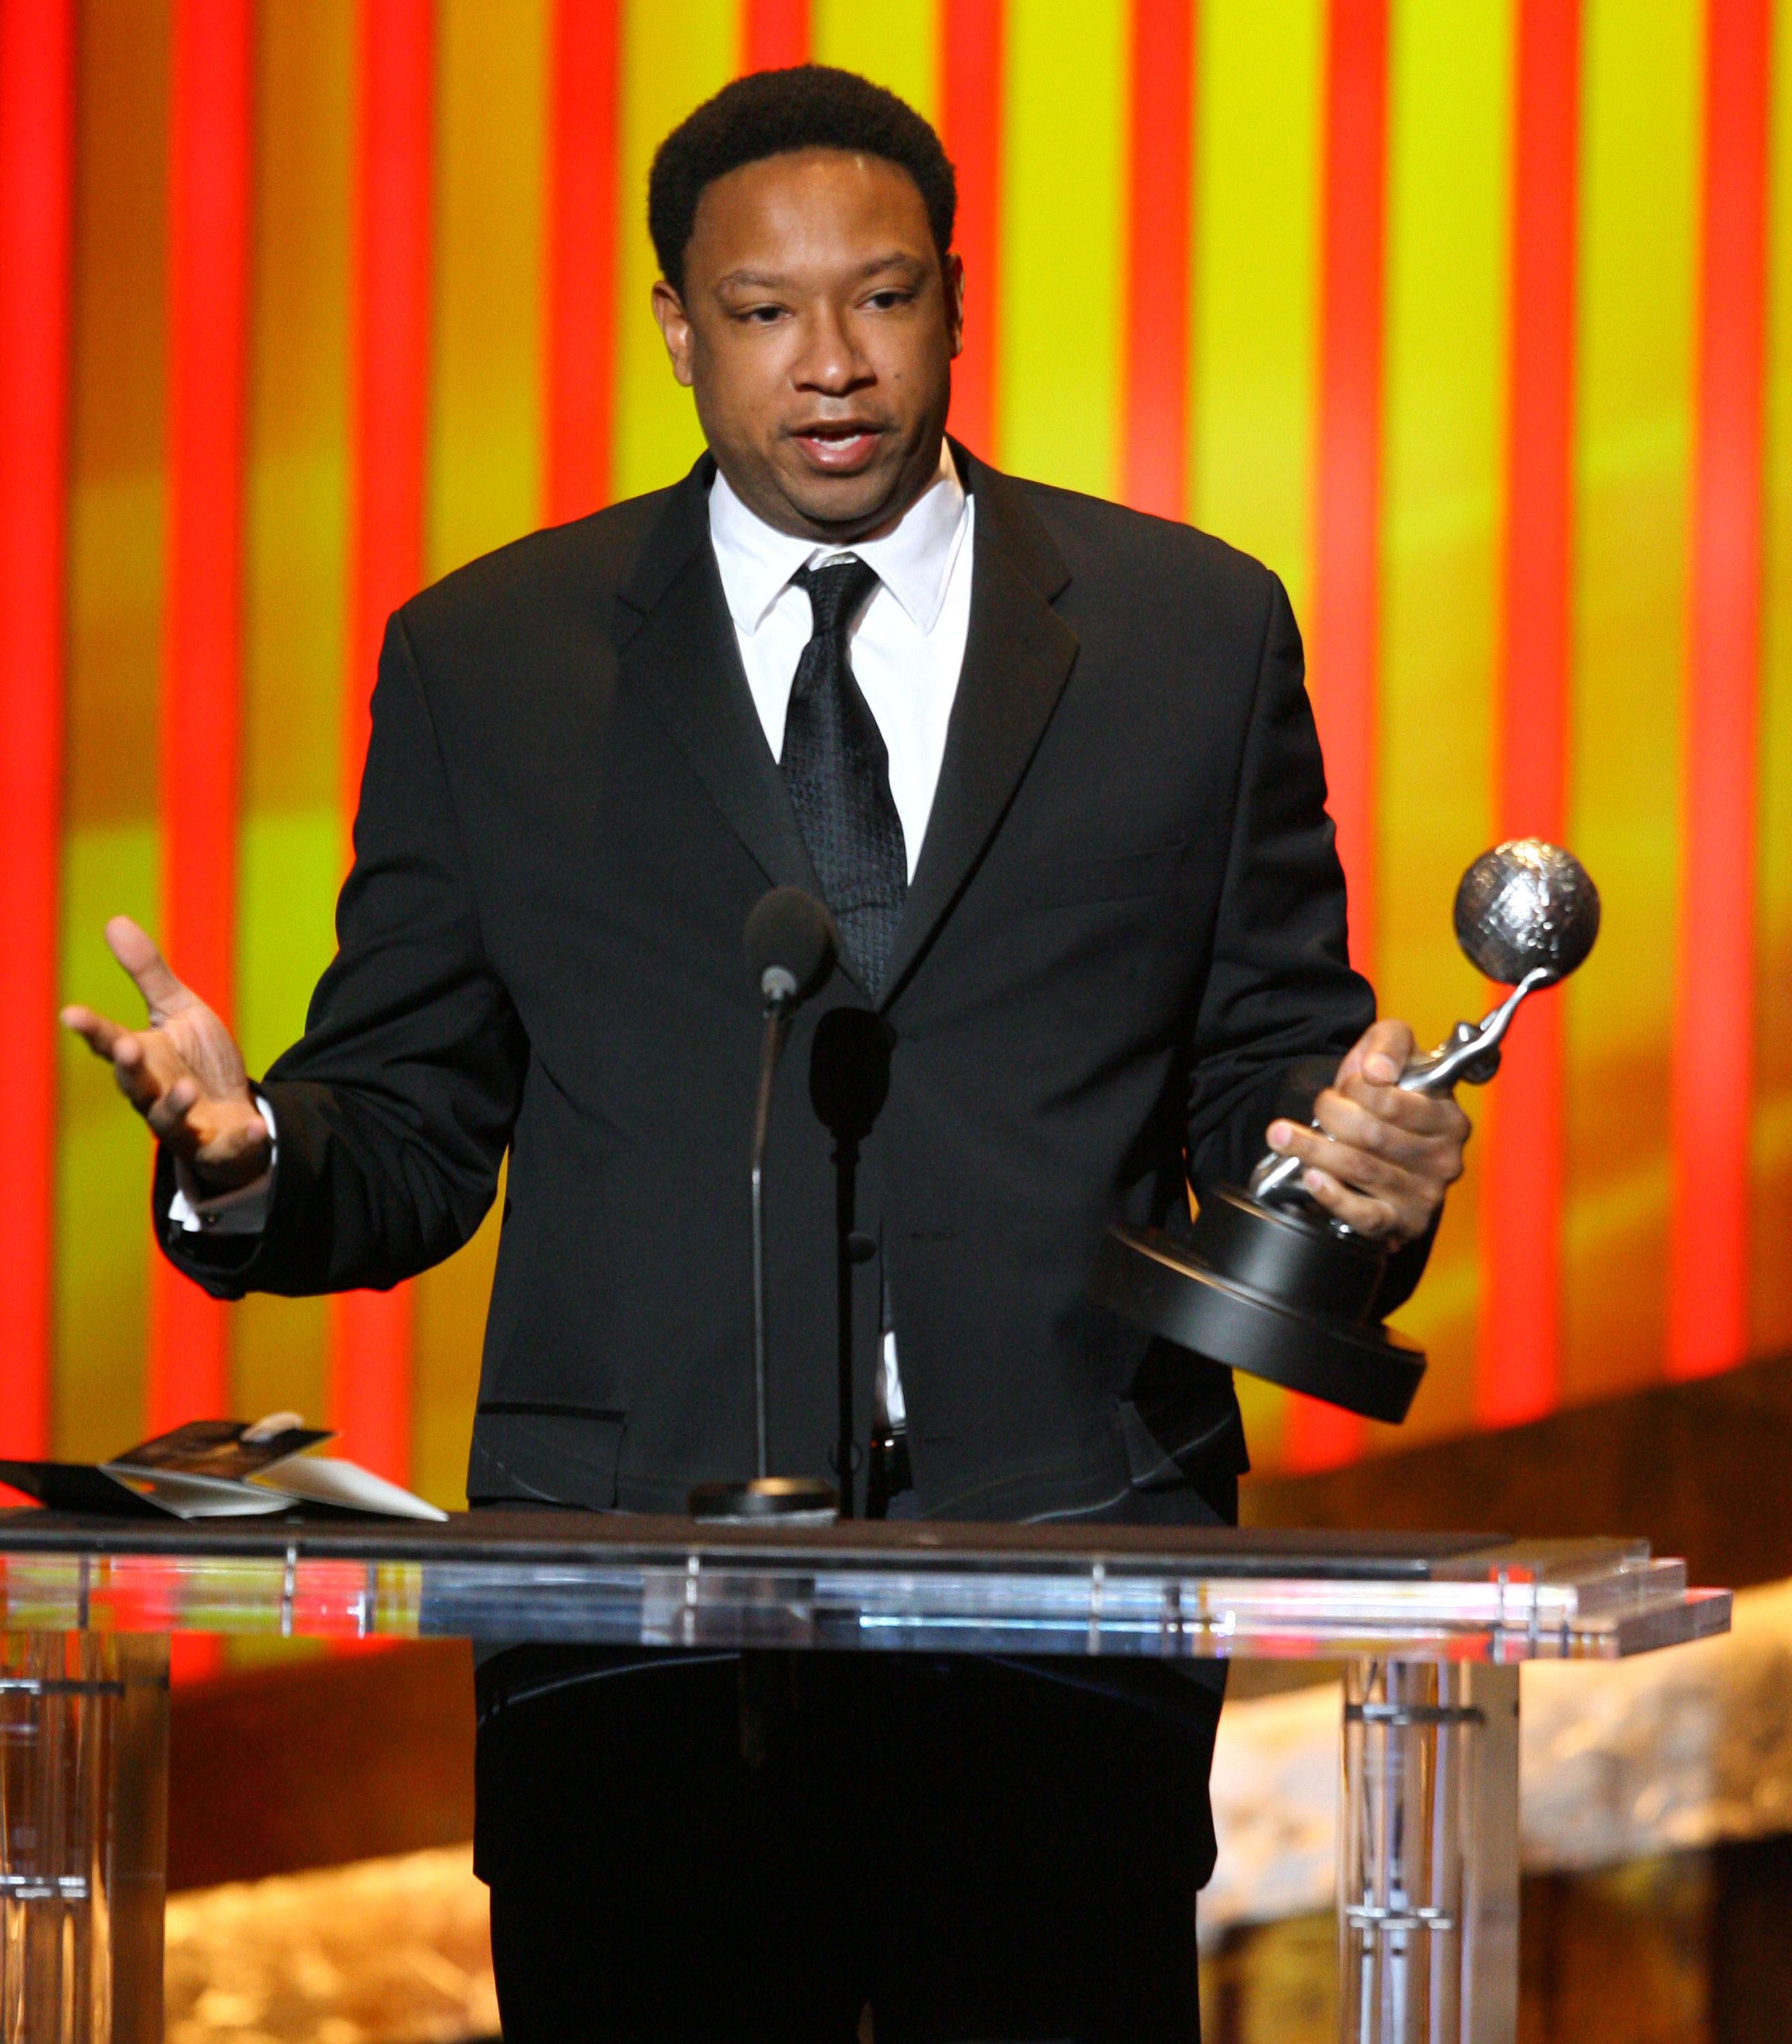 Reggie Hayes, cast member, winner Oustanding Comedy Series for "Girlfriends" on March 02, 2007 | Photo: Getty Images